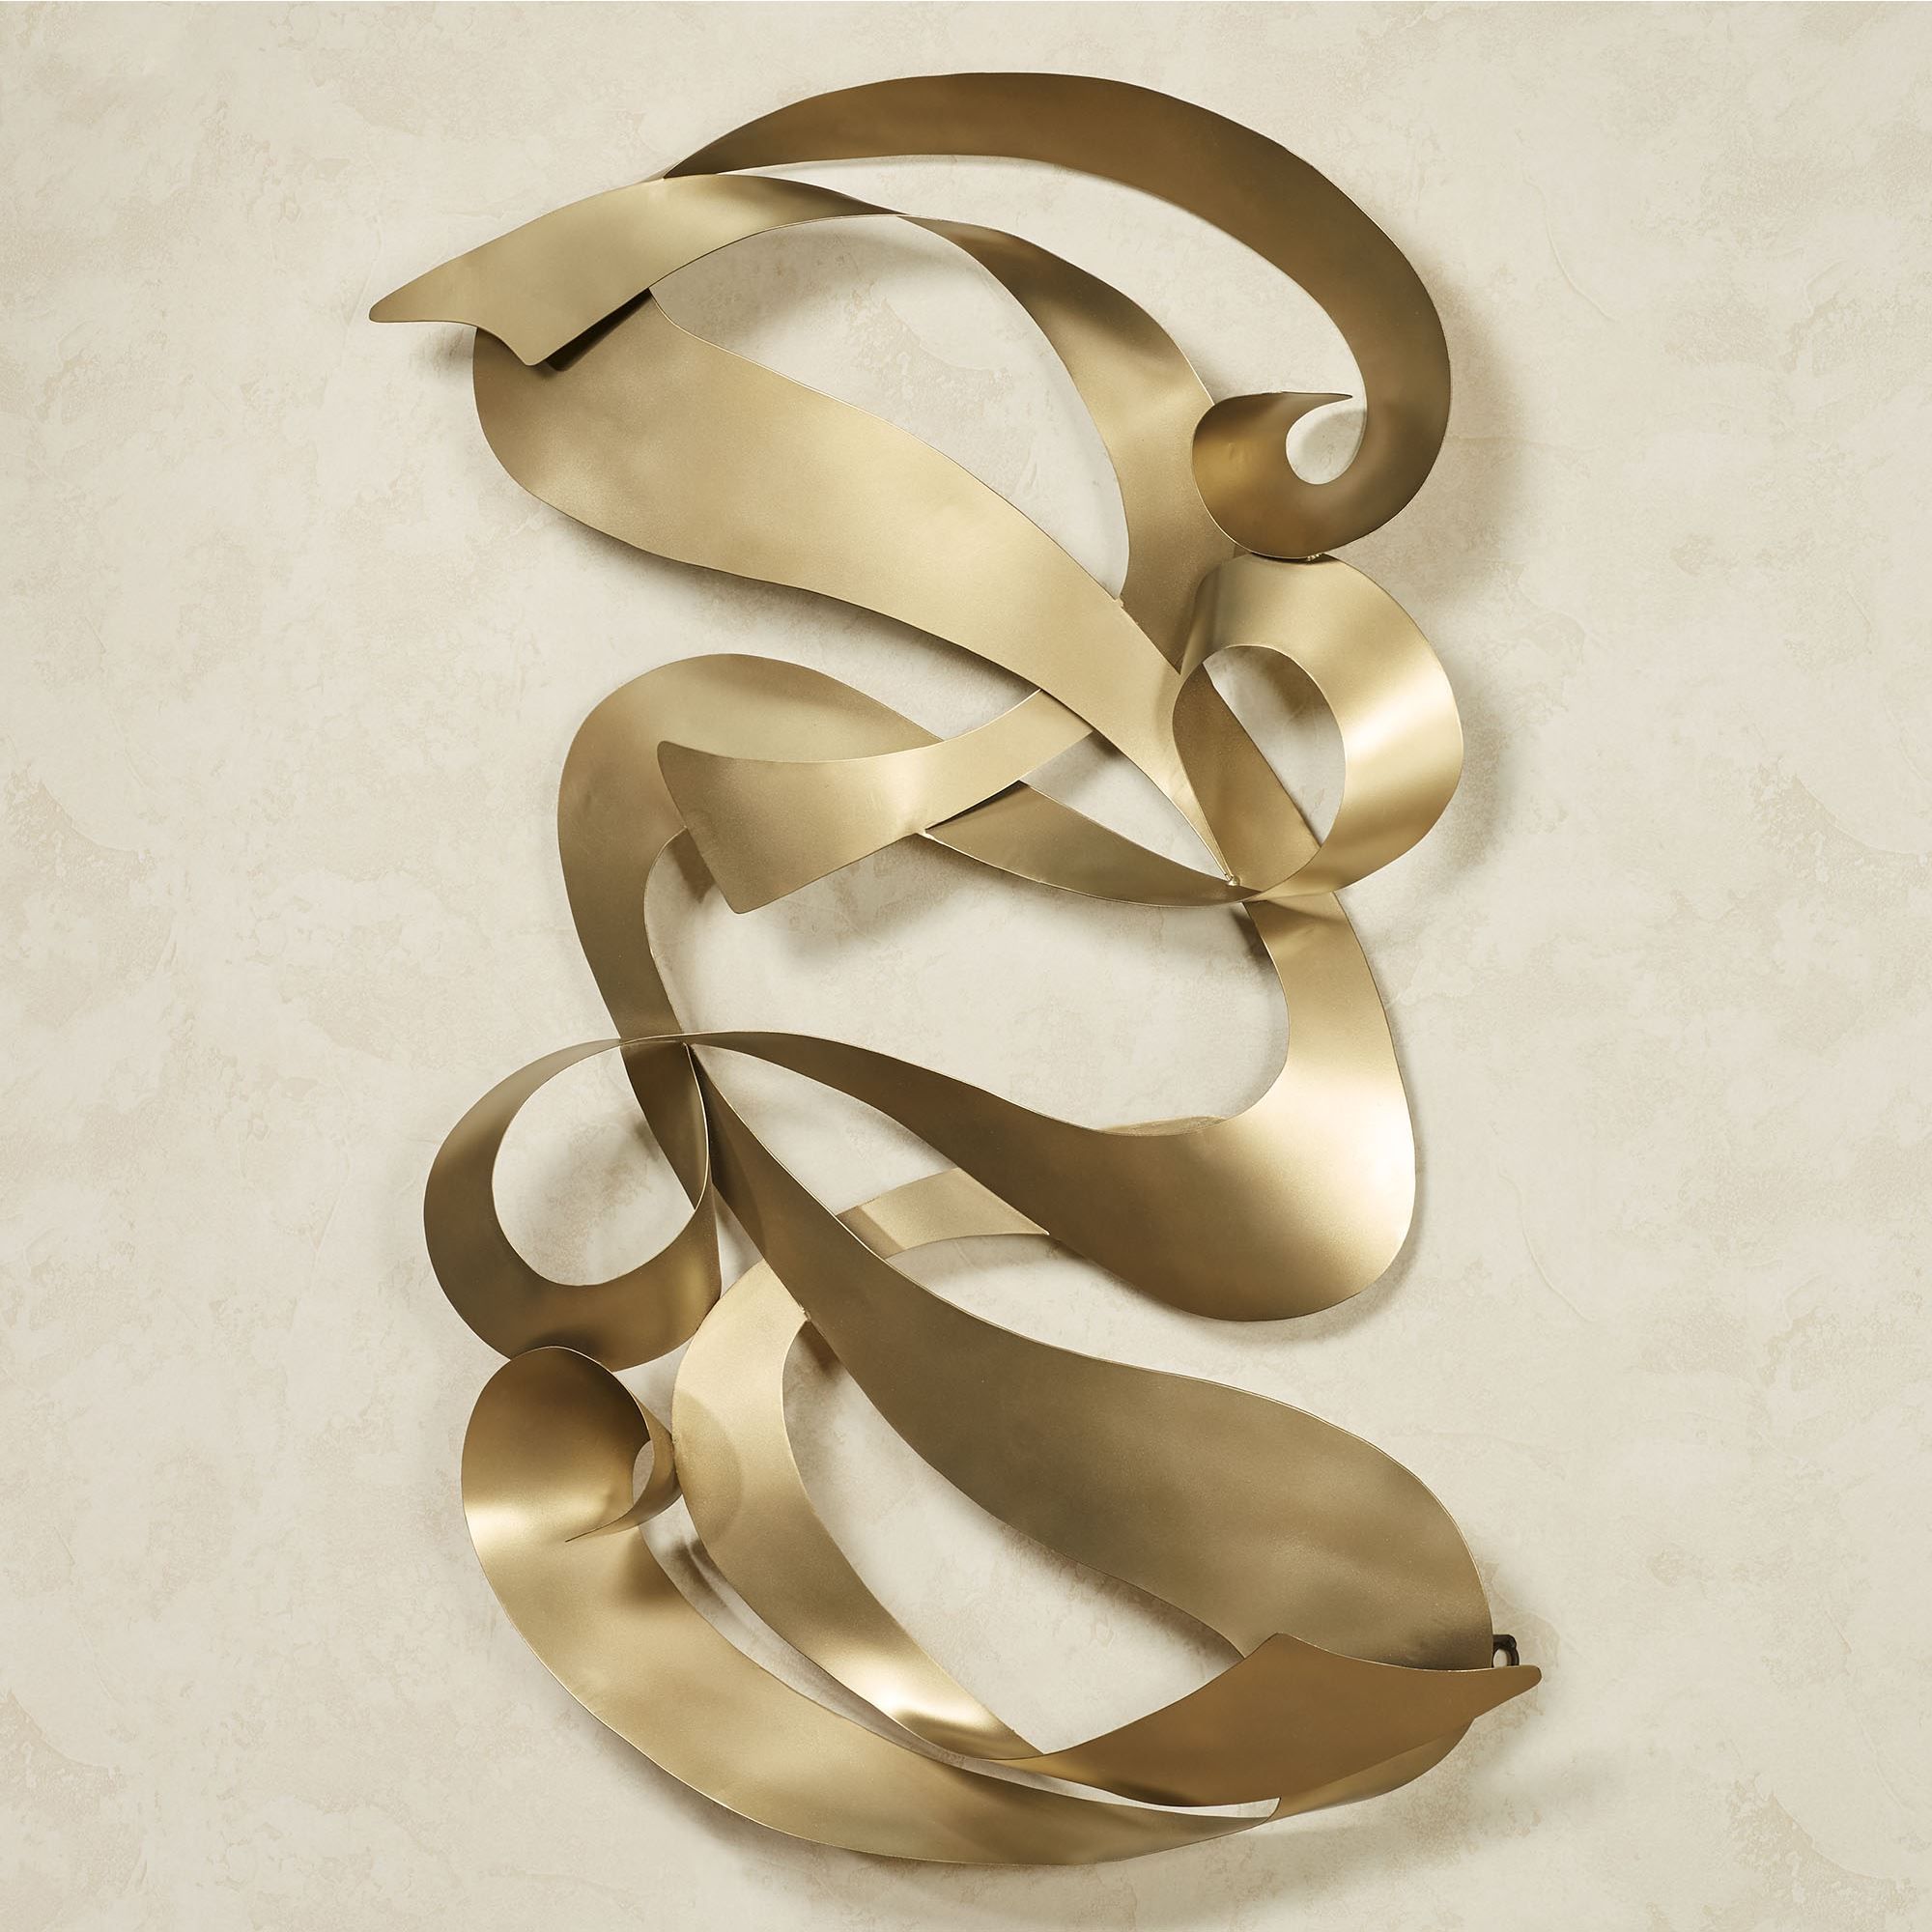 Reverence Gold Abstract Metal Wall Sculpturejasonw Studios Intended For Gold And Silver Metal Wall Art (View 12 of 15)